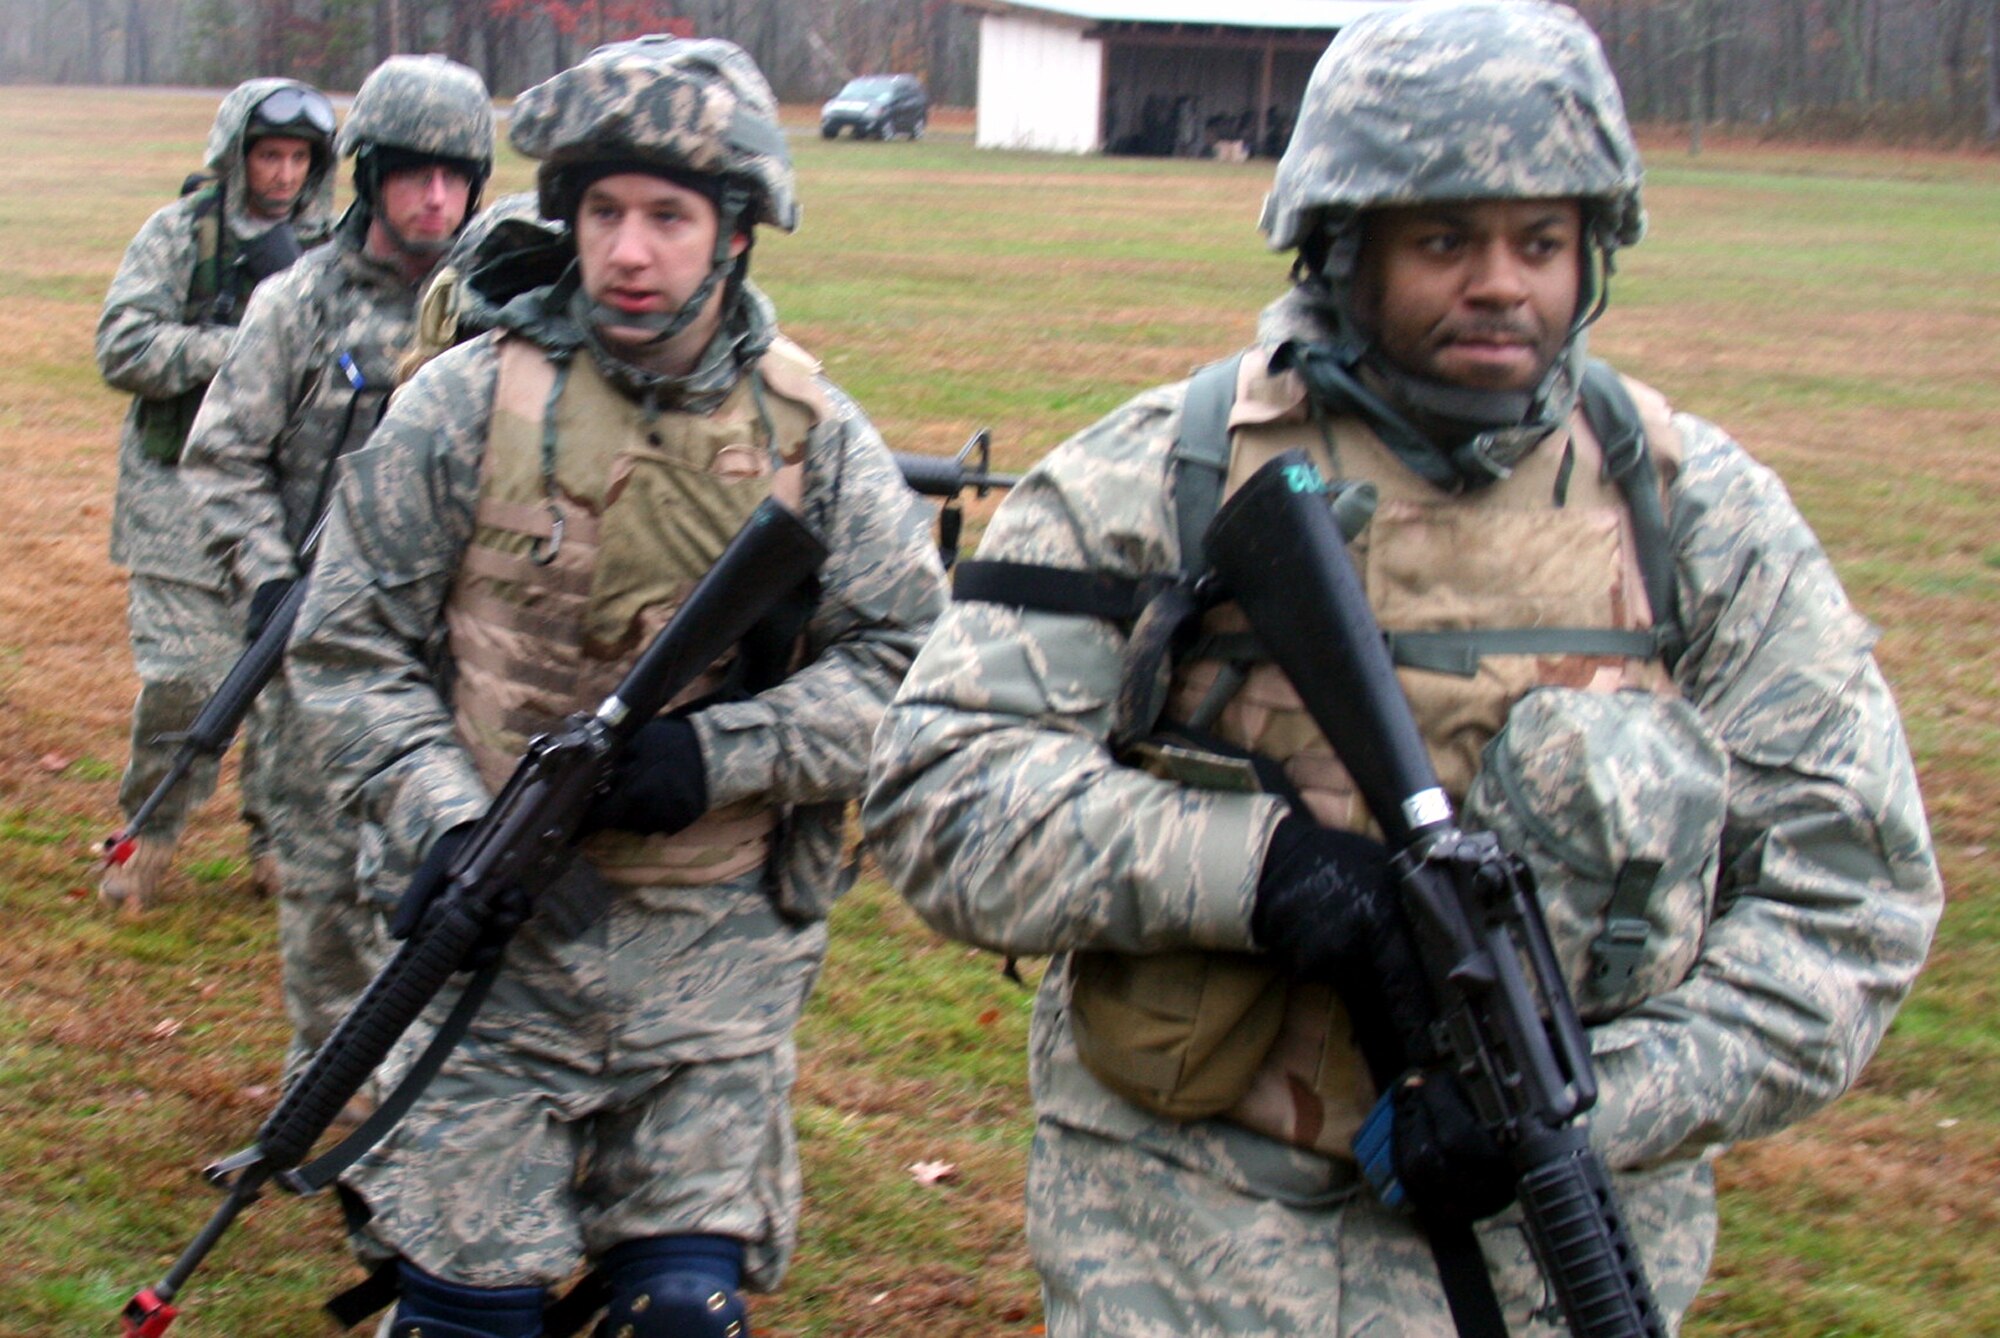 Students in the Combat Airman Skills Training Course 10-1A practices dismounted patrolling tactics during course training on Nov. 12, 2009, on a range at Joint Base McGuire-Dix-Lakehurst, N.J.  The course, taught by the U.S. Air Force Expeditionary Center's 421st Combat Training Squadron, prepares Airmen for upcoming deployments.  (U.S. Air Force Photo/Staff Sgt. Robert Sizelove)